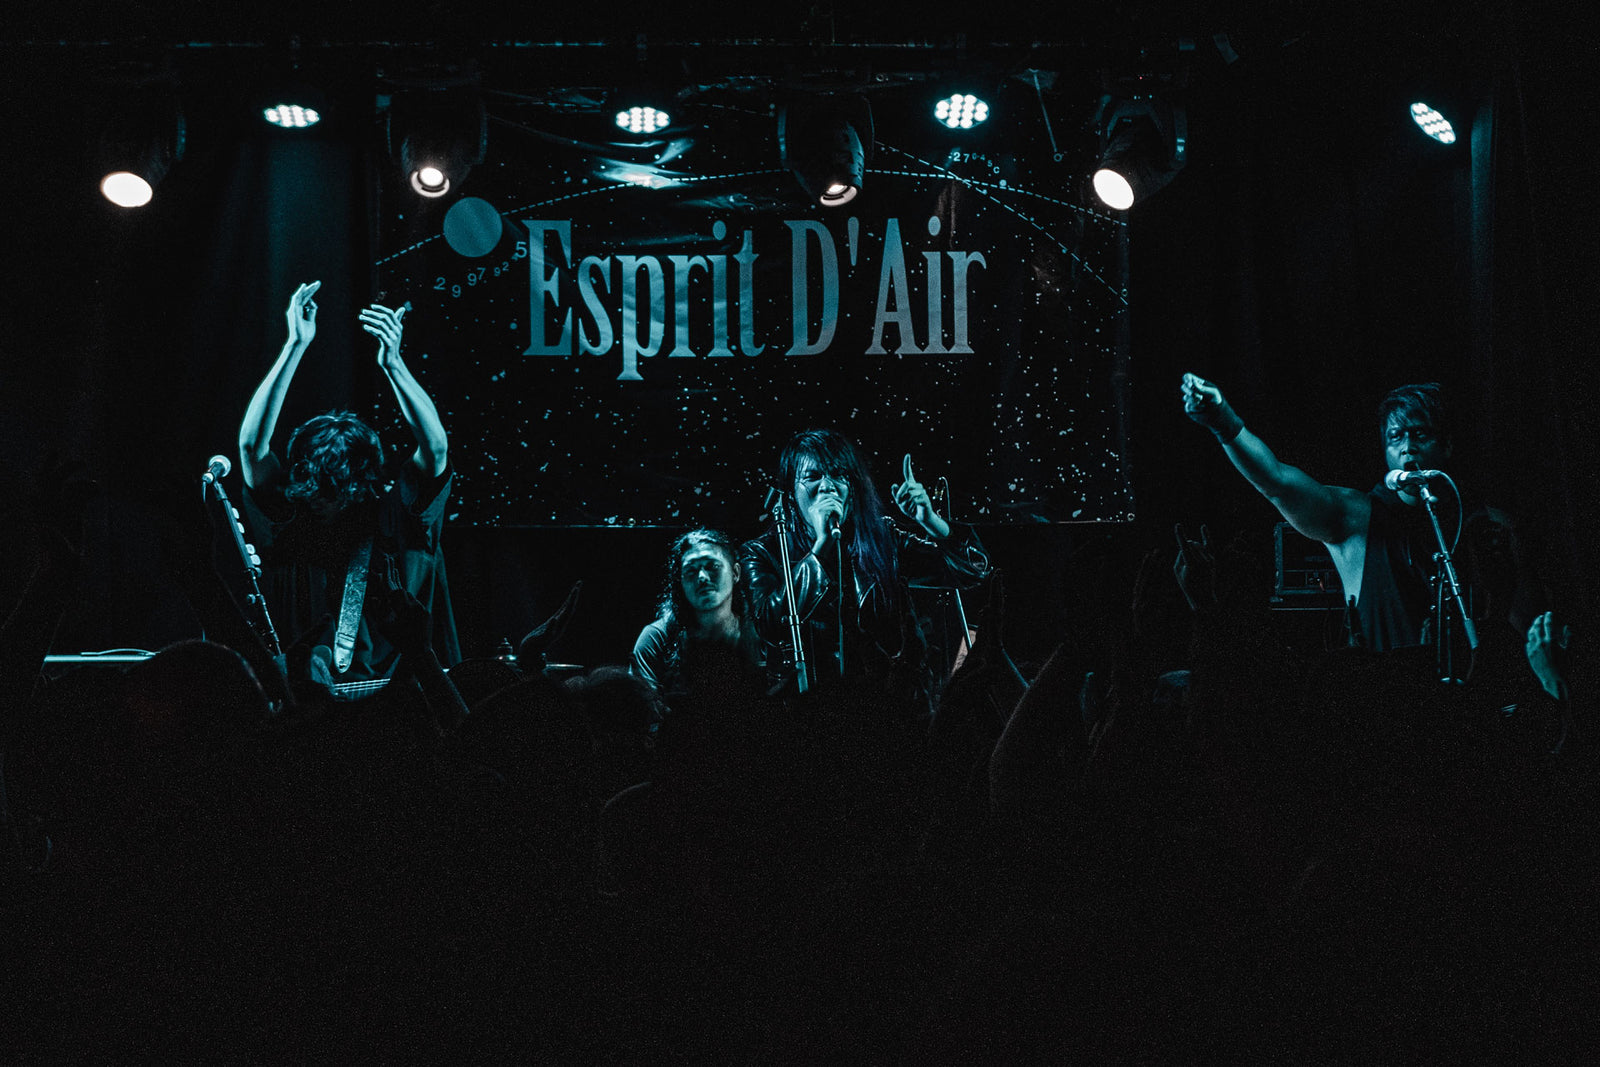 Esprit D'Air announce special 10th anniversary show at The Dome in London